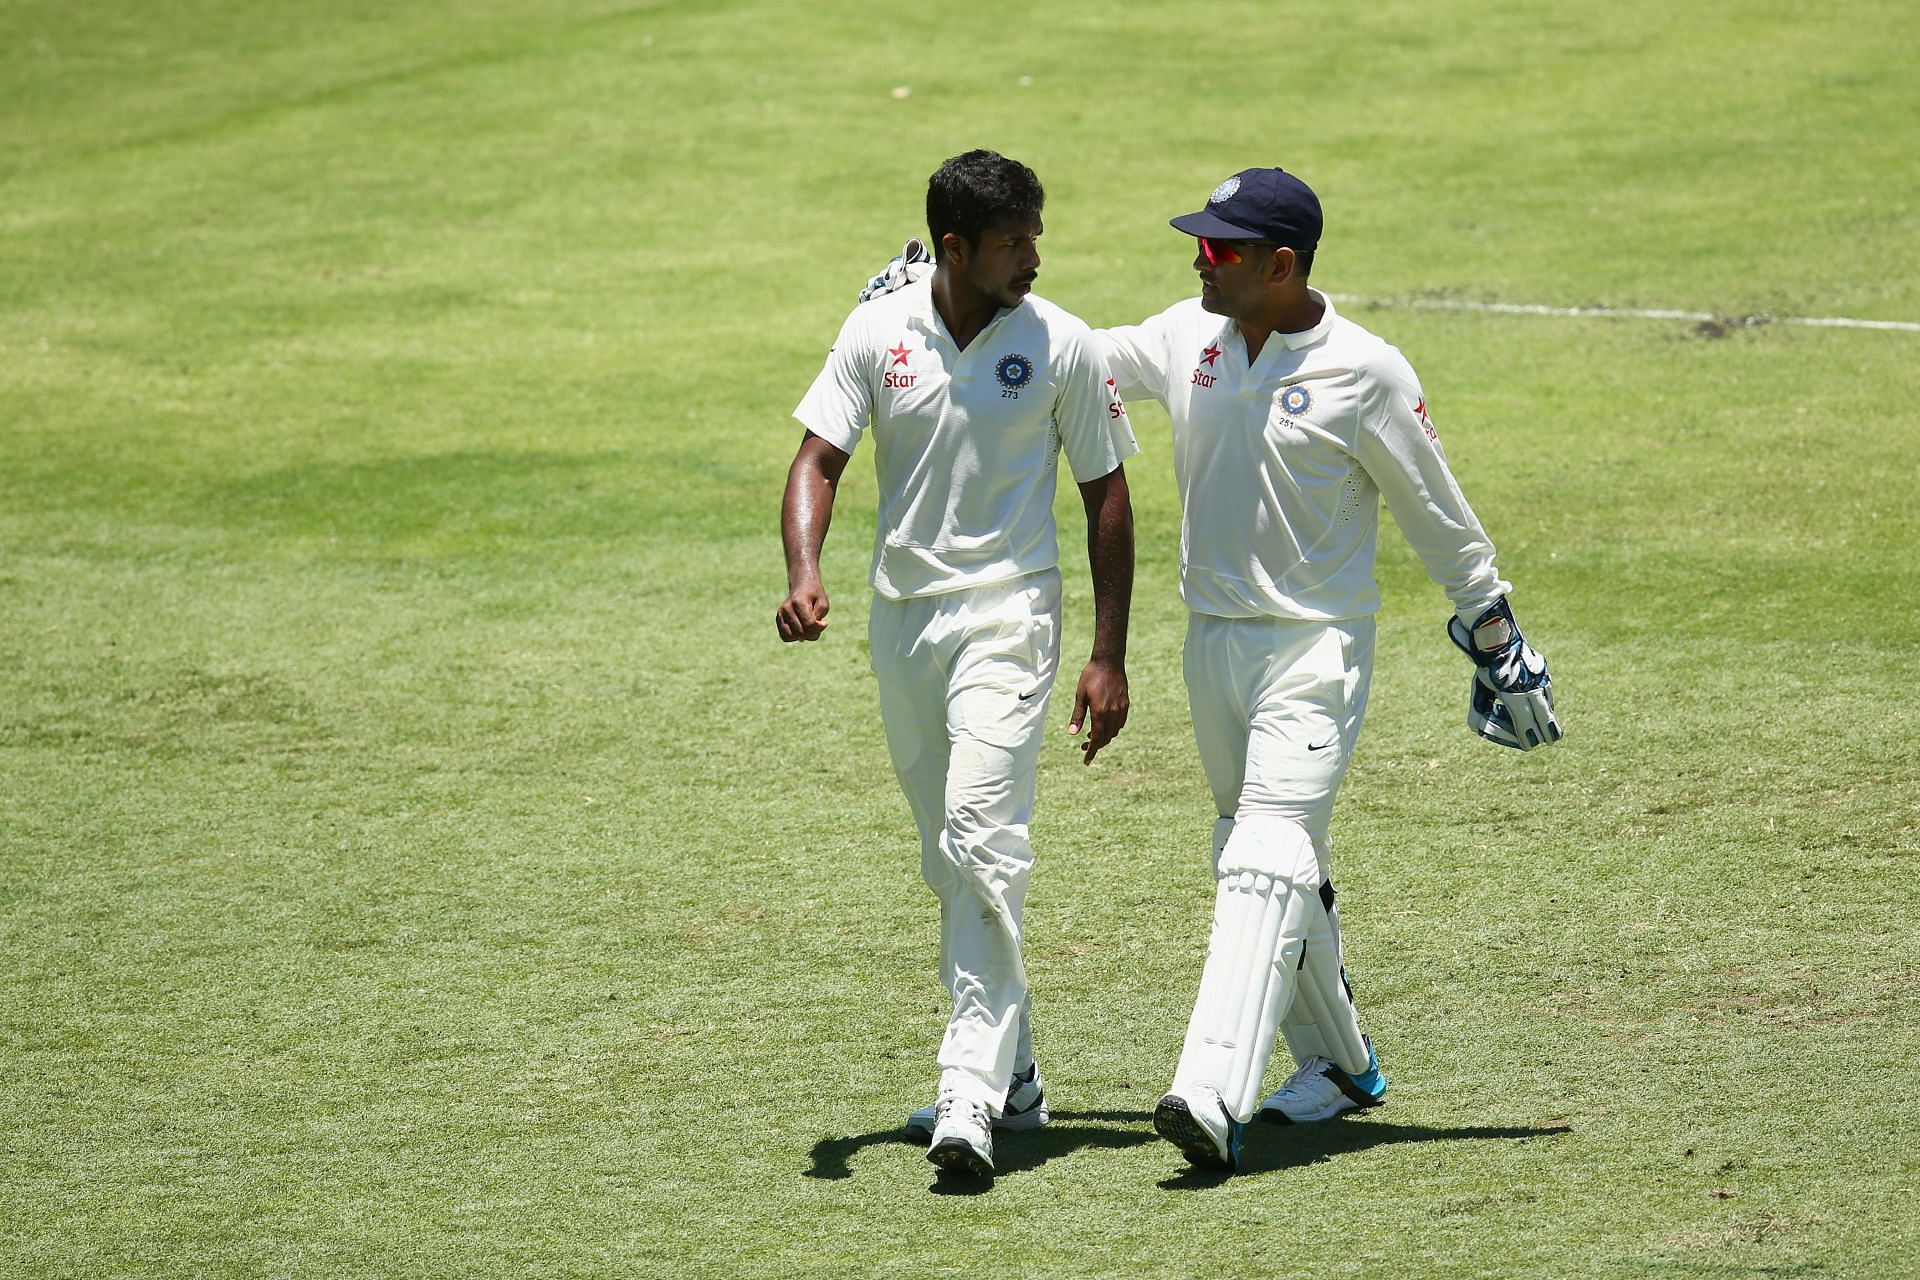 MS Dhoni captained India in his last Test match